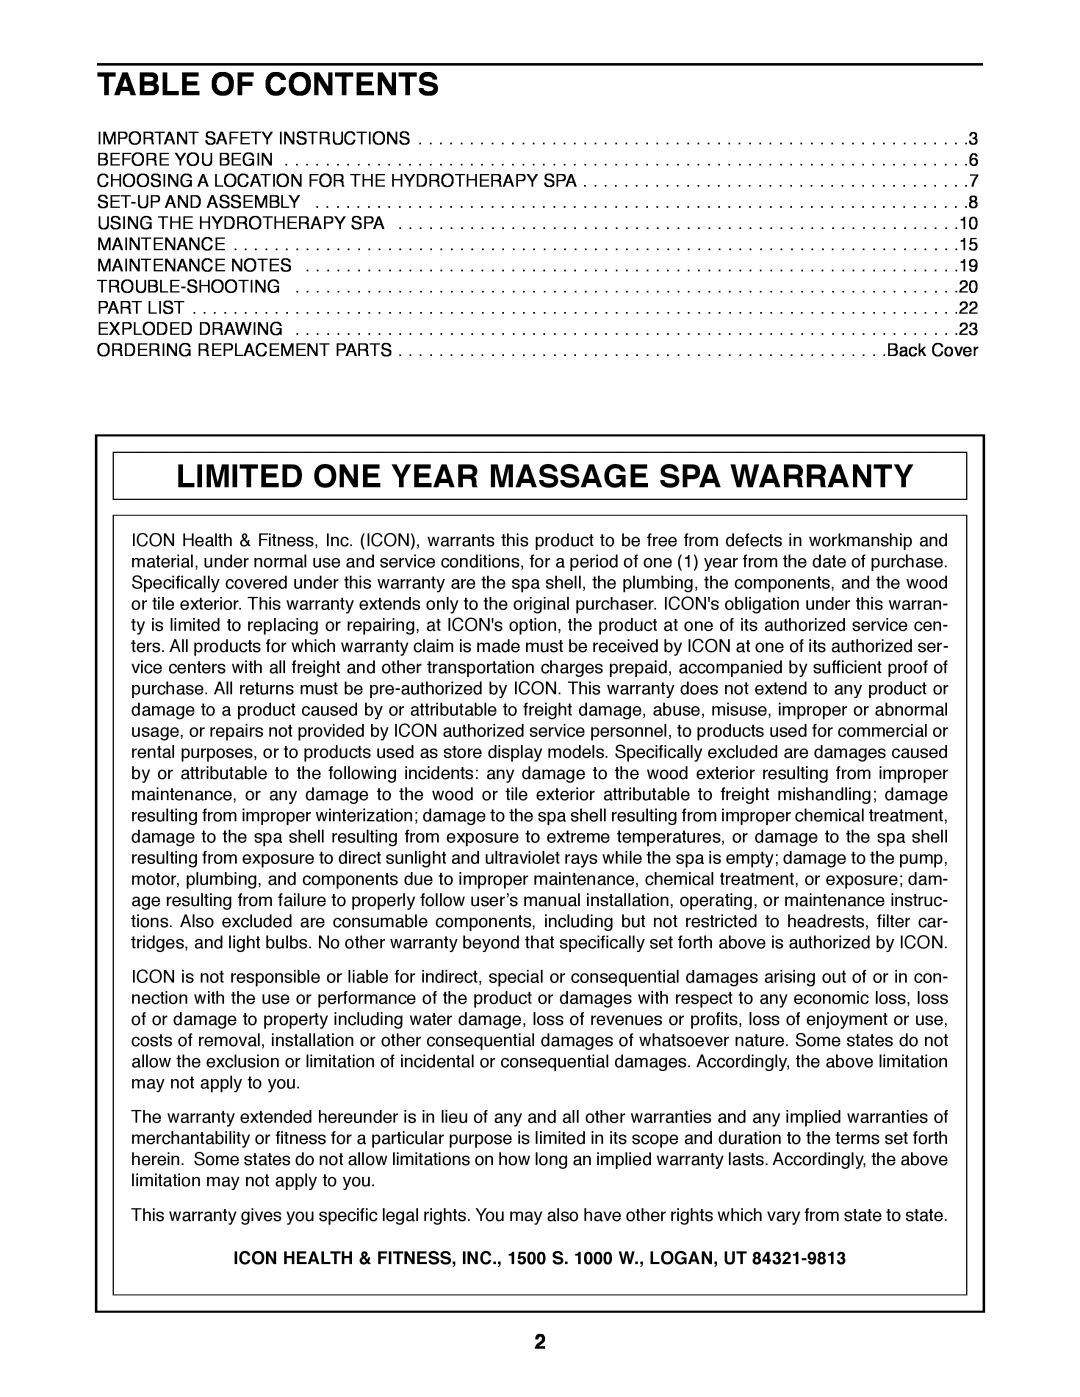 Weslo WLHS42080 manual Table Of Contents, Limited One Year Massage Spa Warranty 